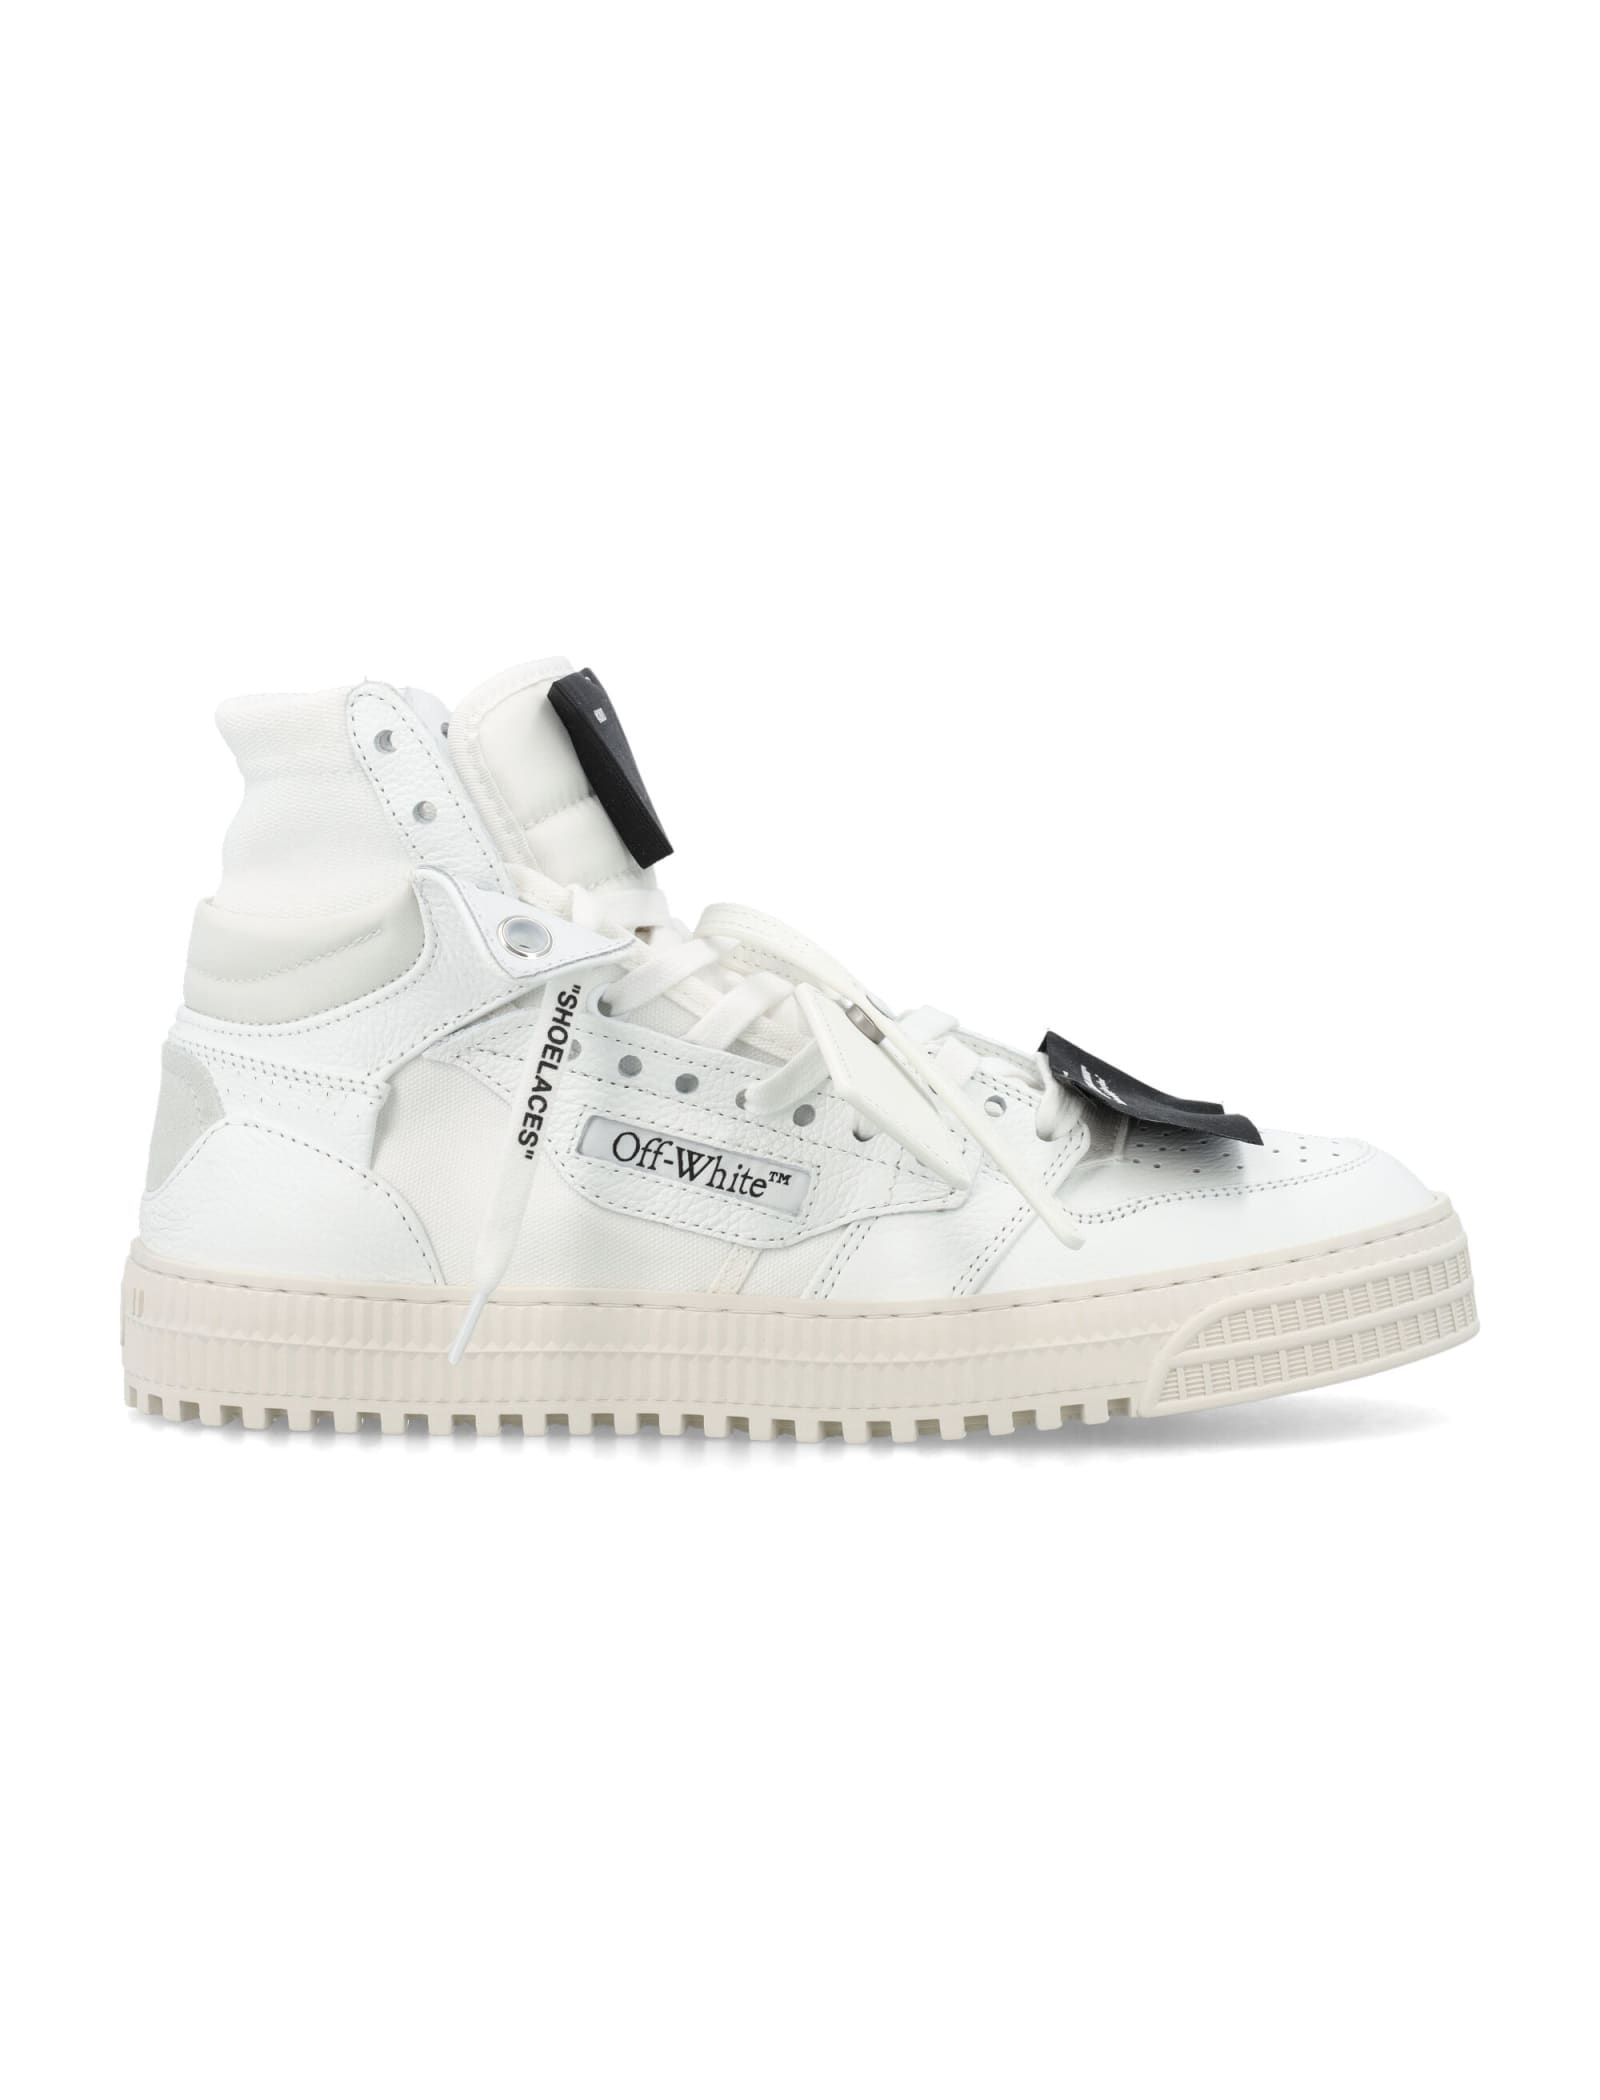 Off-white 3.0 Off Court Leather Hi-top In White Black